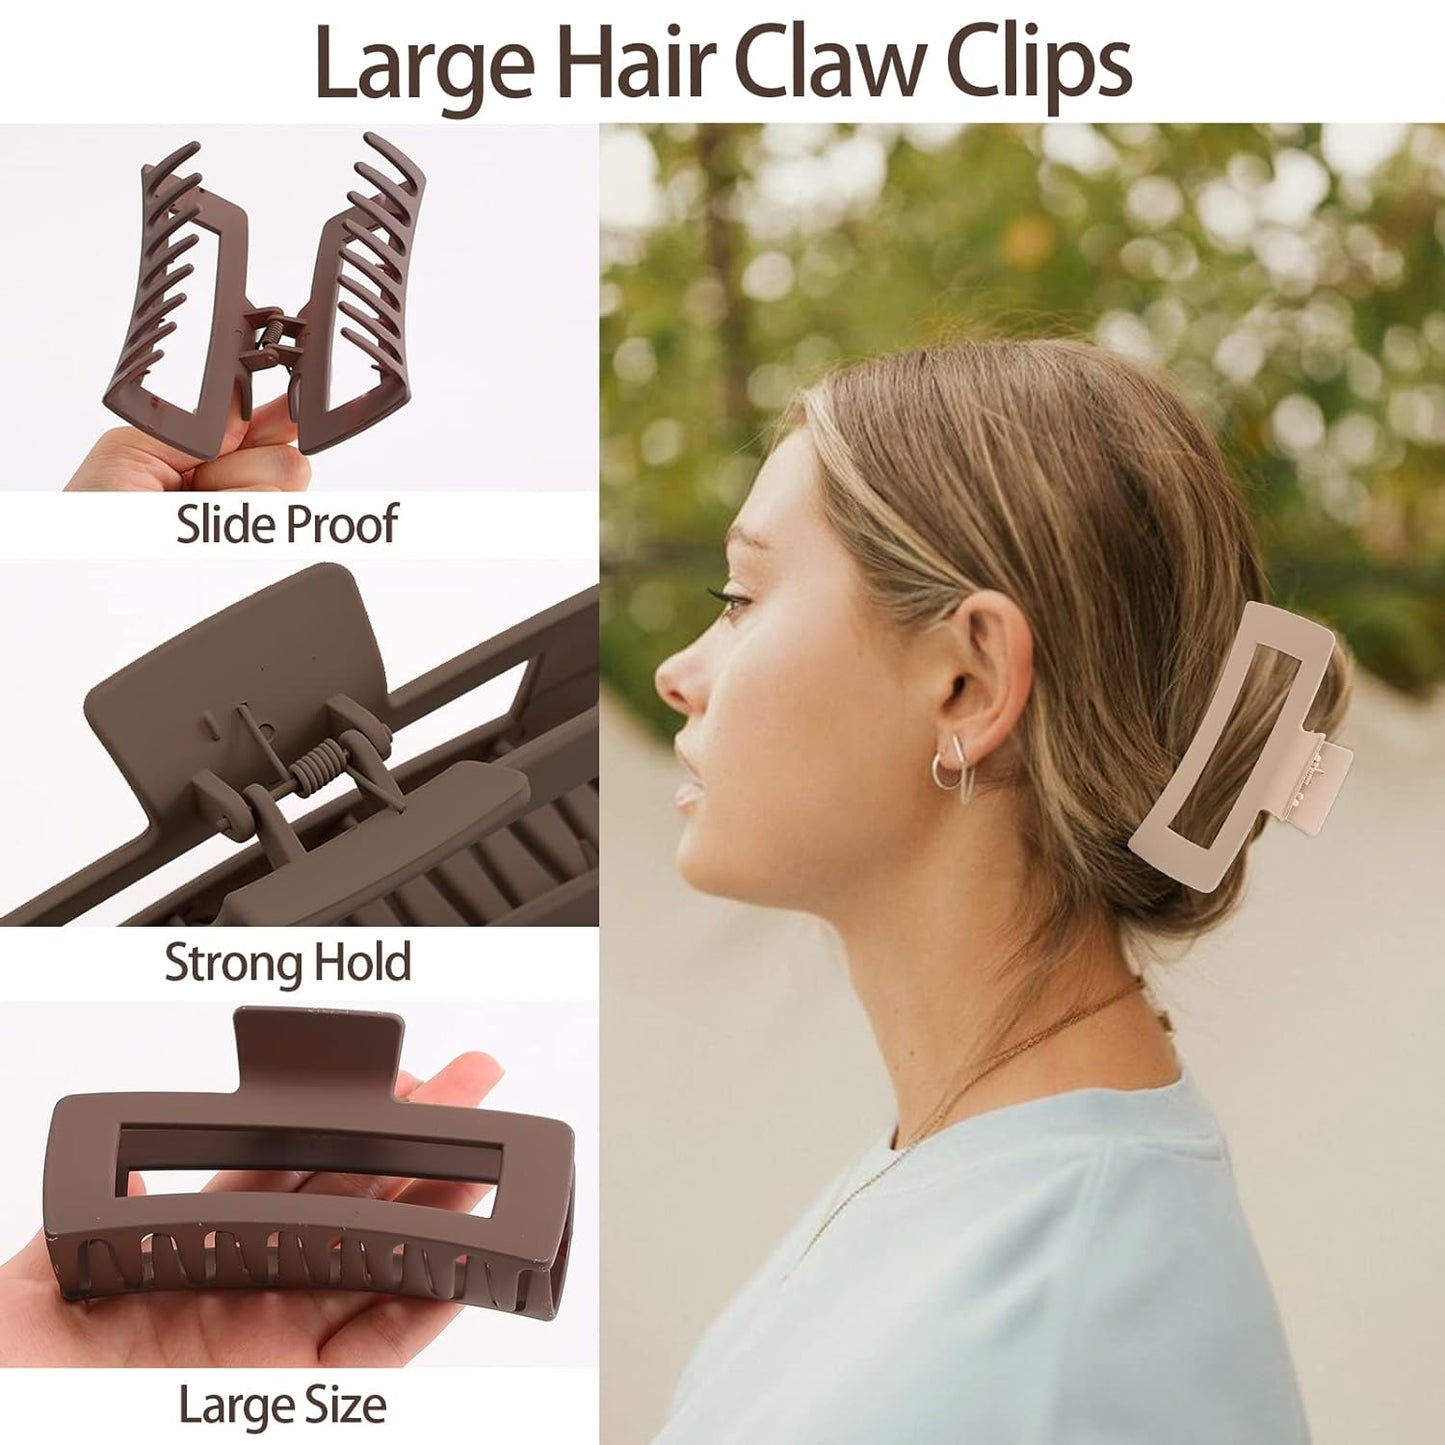 5.1 Inch(13cm) Extra Large Frosted Hair Clips, Big Claw Clips for Thick Long Curly Hair, Strong Hold Claw Clip Oversized Non-slip Square Hair Clips for Women, Durable Matte XL Frosted Claw Clips